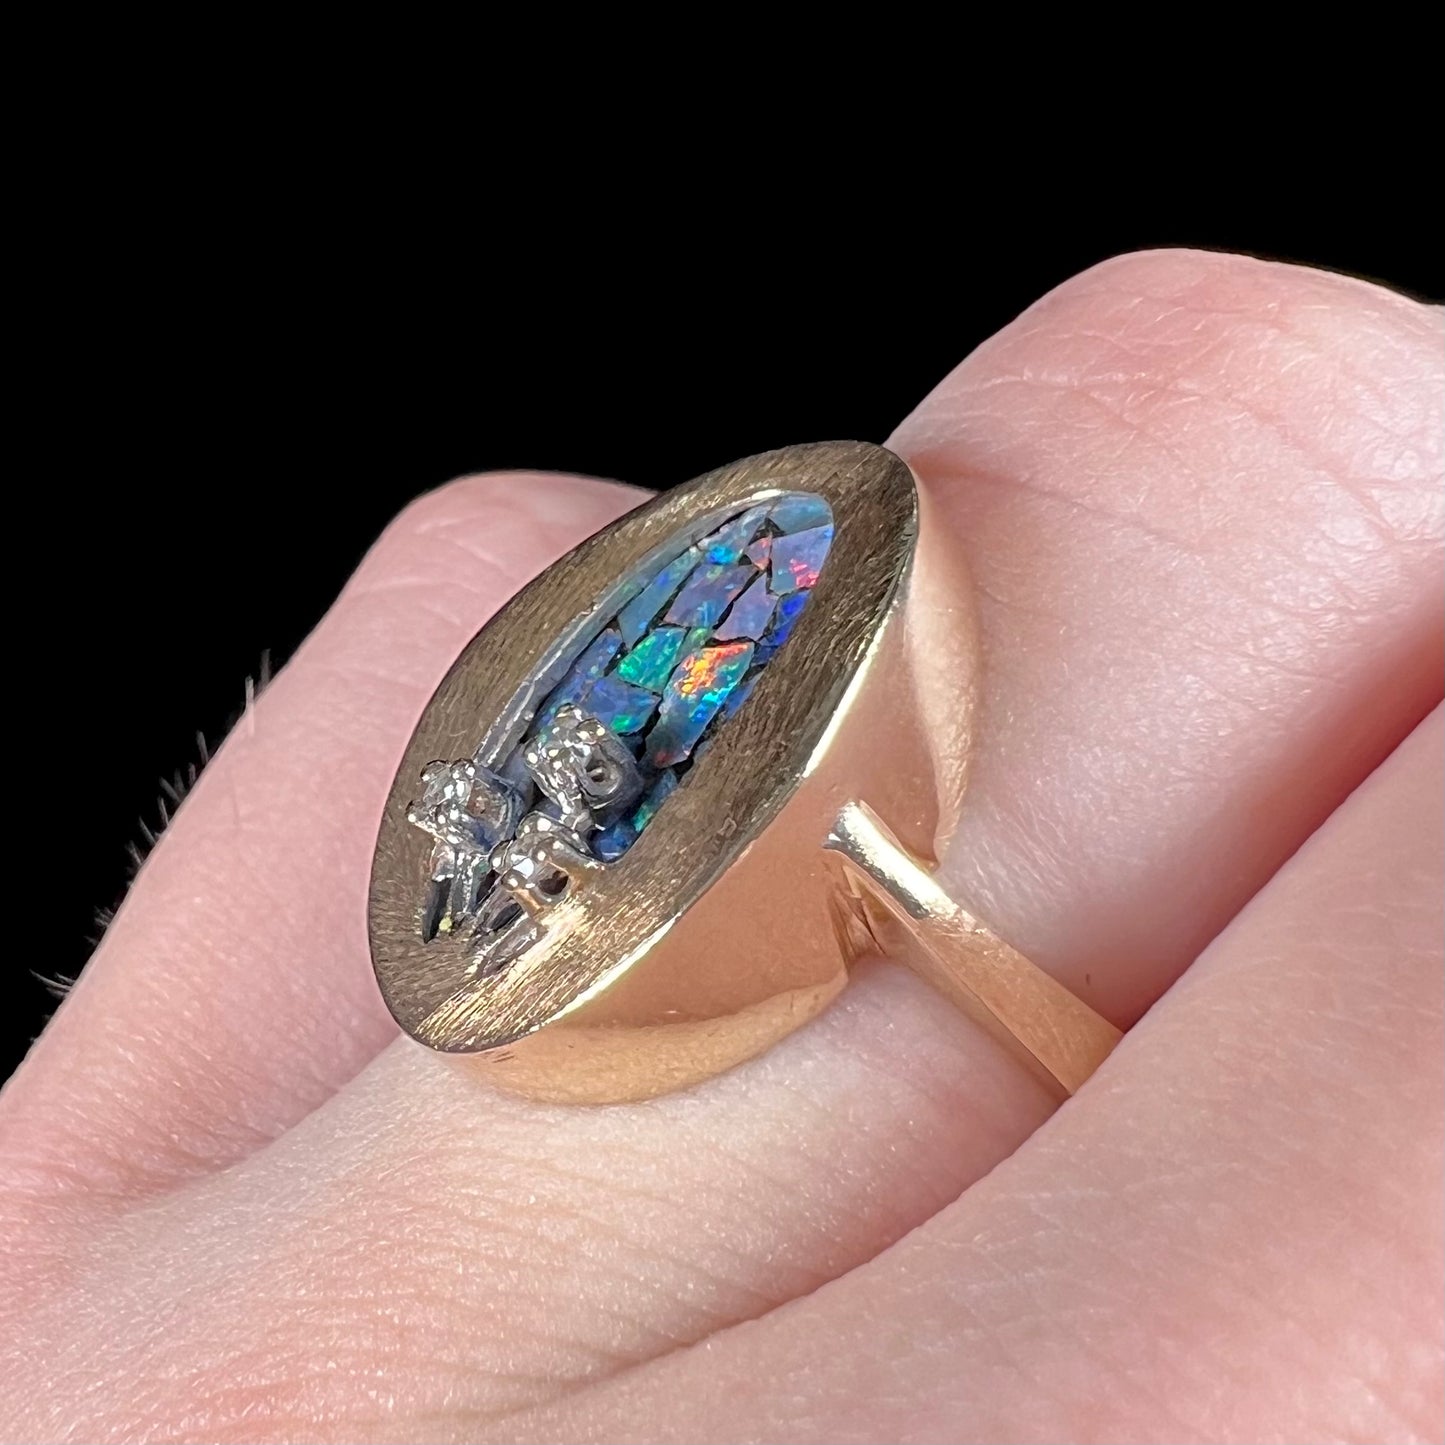 A vintage mosaic opal ring set with diamond accents in 10 karat yellow and white gold.